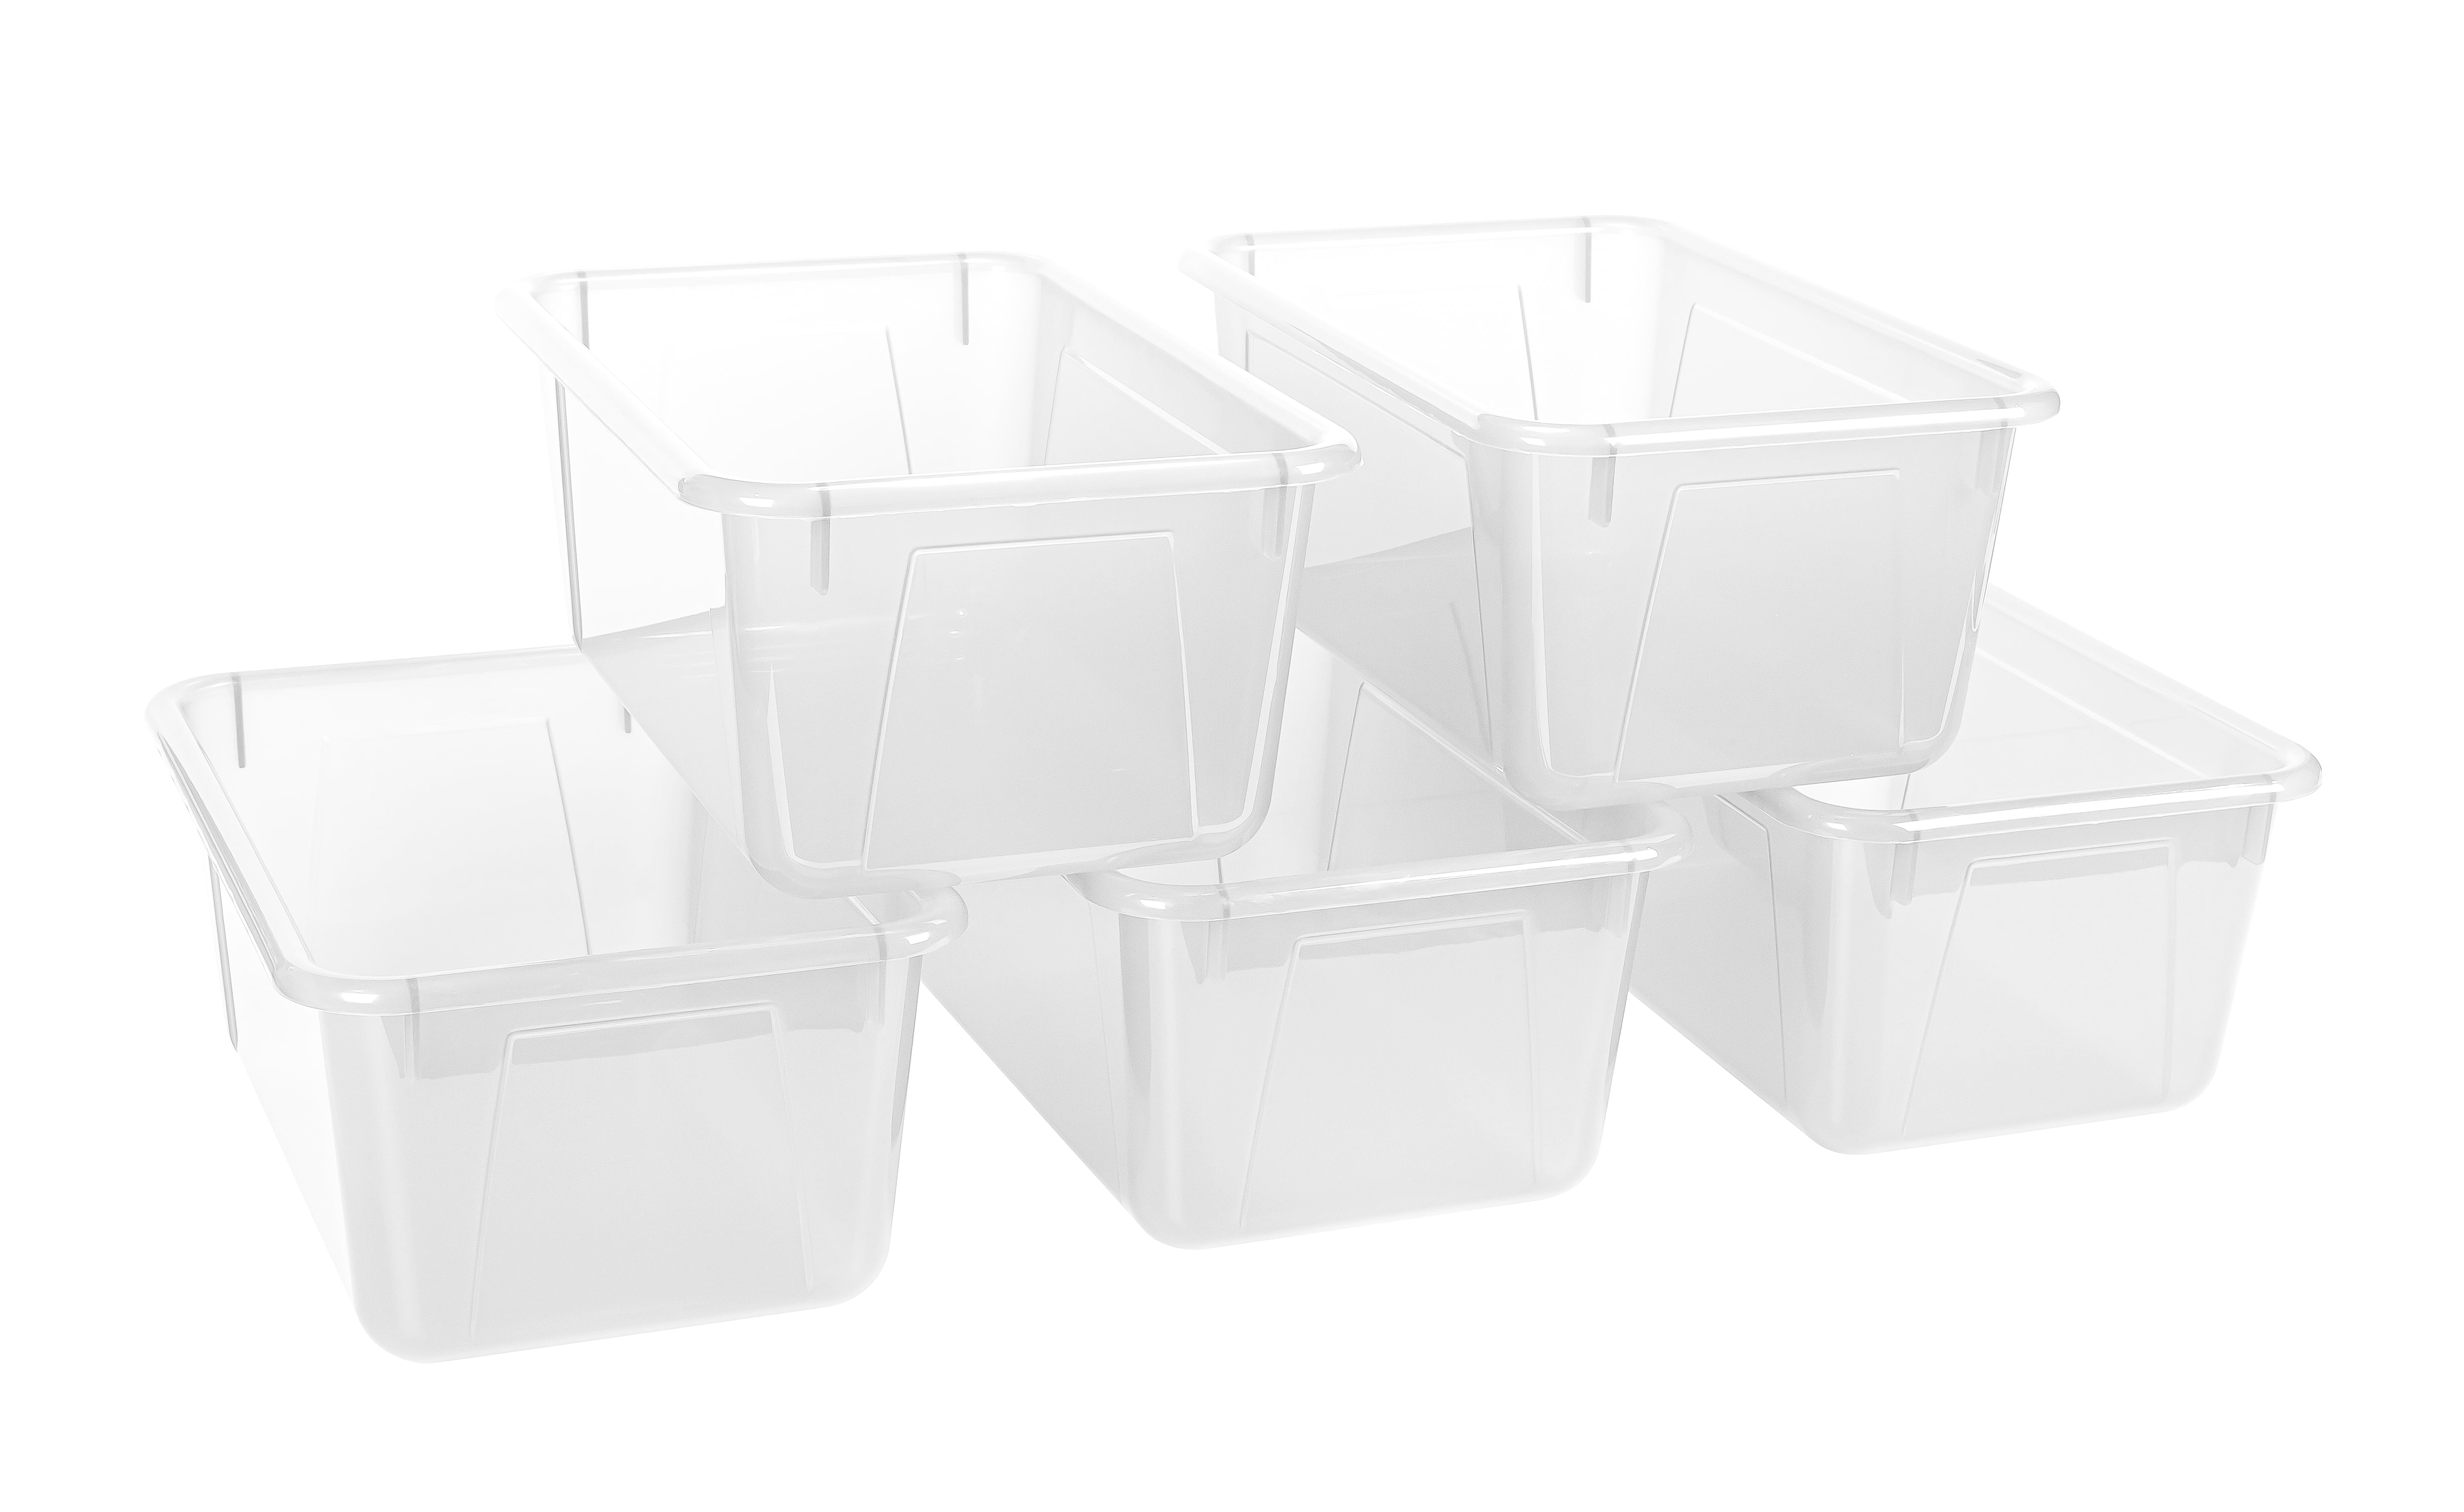 The Teachers' Lounge®  Small Plastic Storage Bin, Clear, Pack of 6